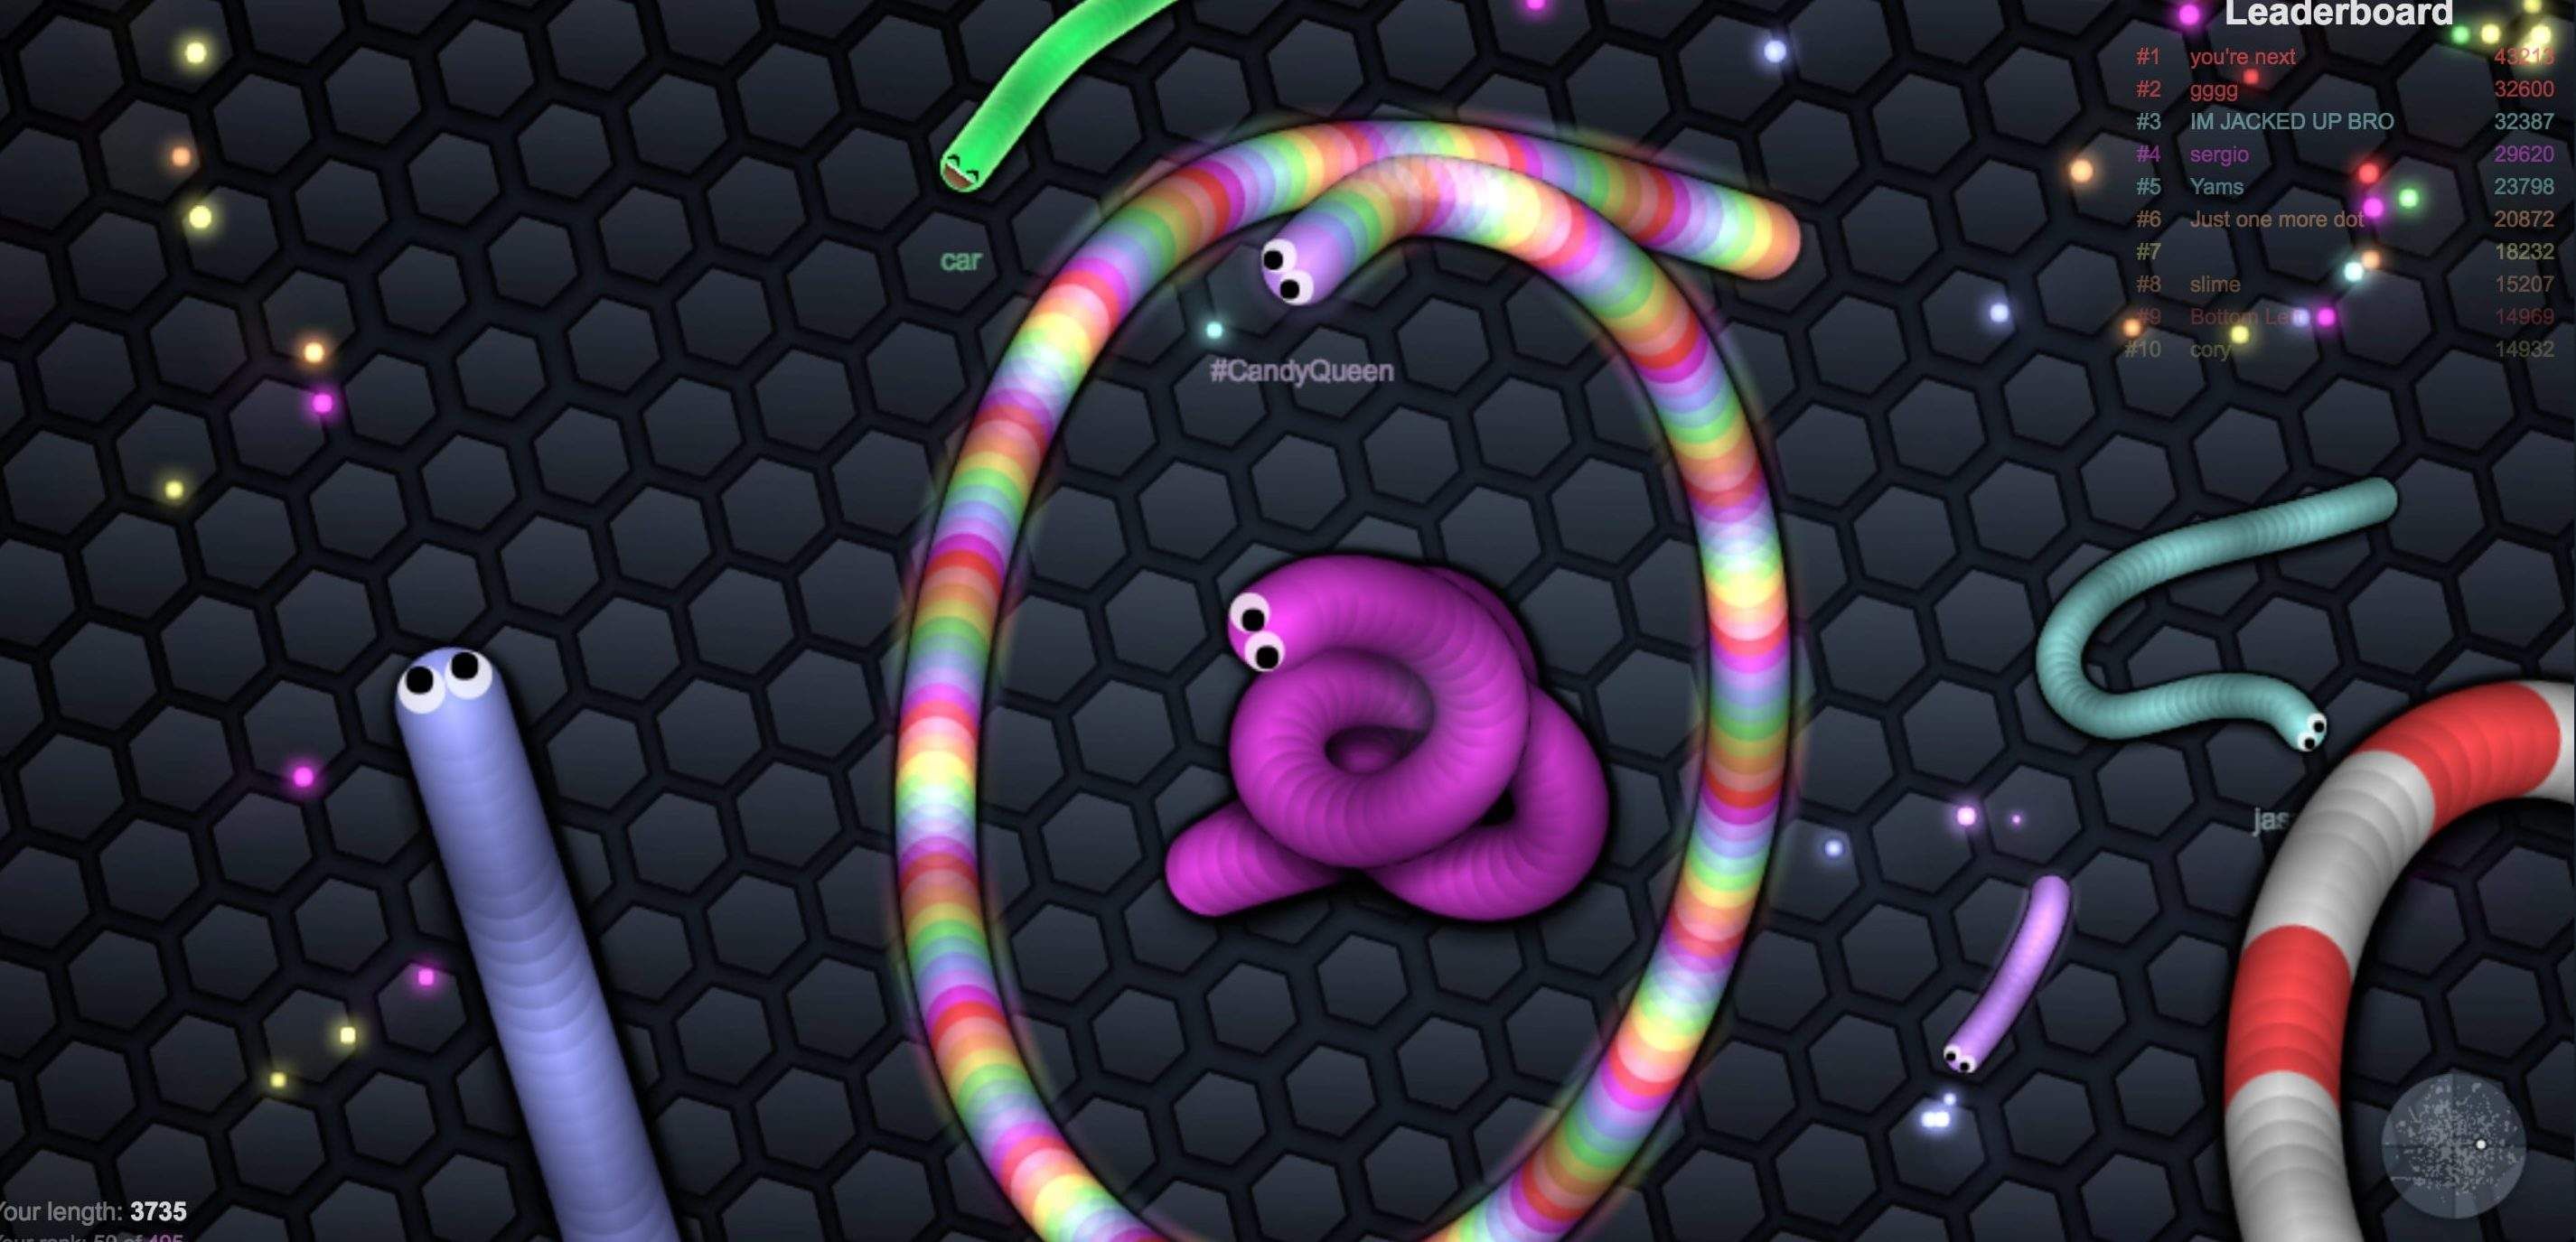 Where Slitherio Came From And Why Its So Popular